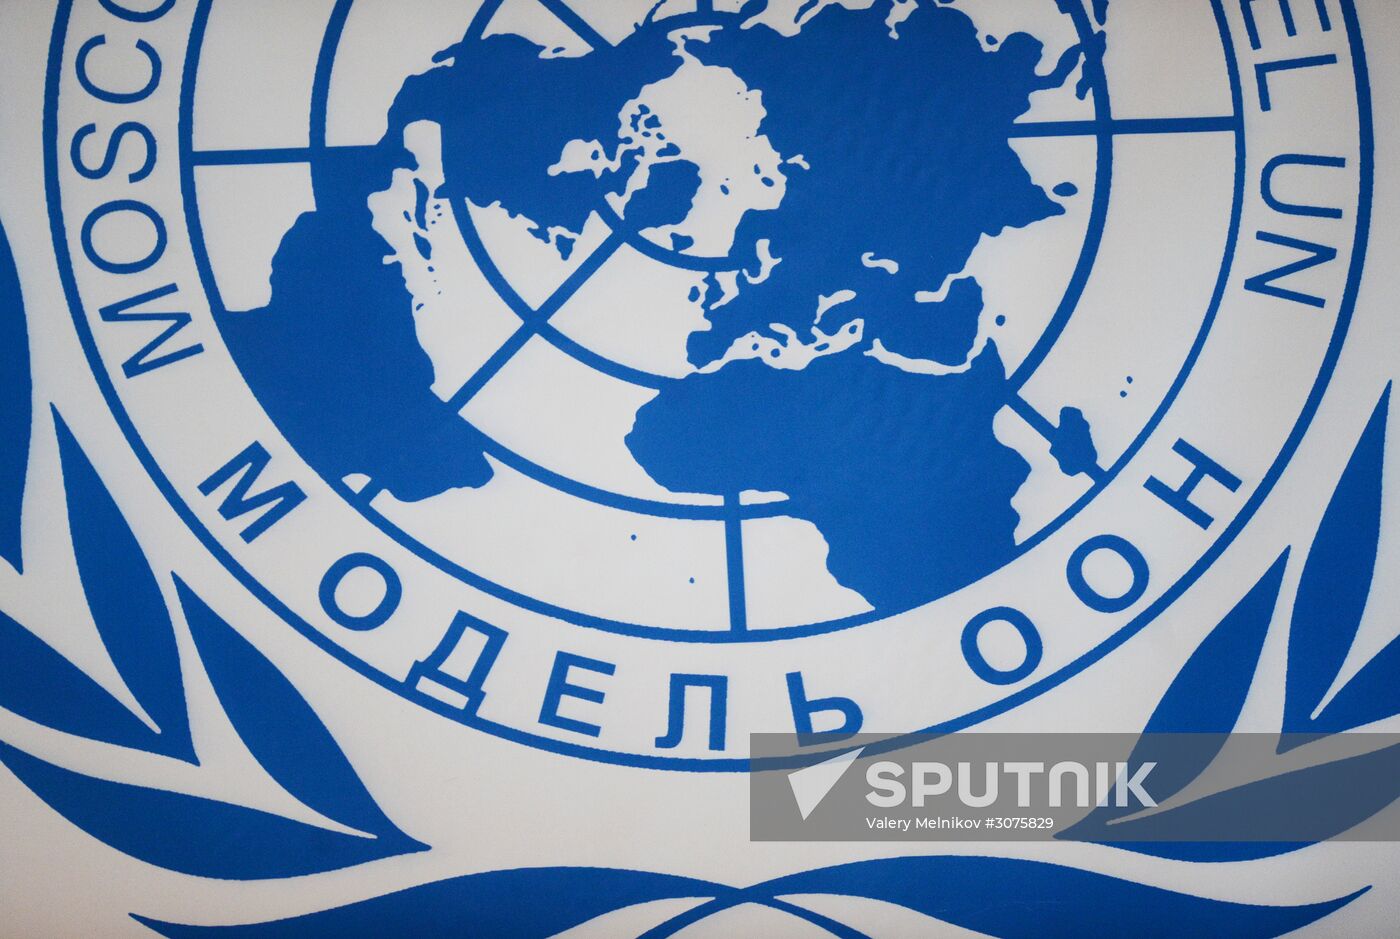 Grand opening of Vitaly Churkin Moscow International Model United Nations